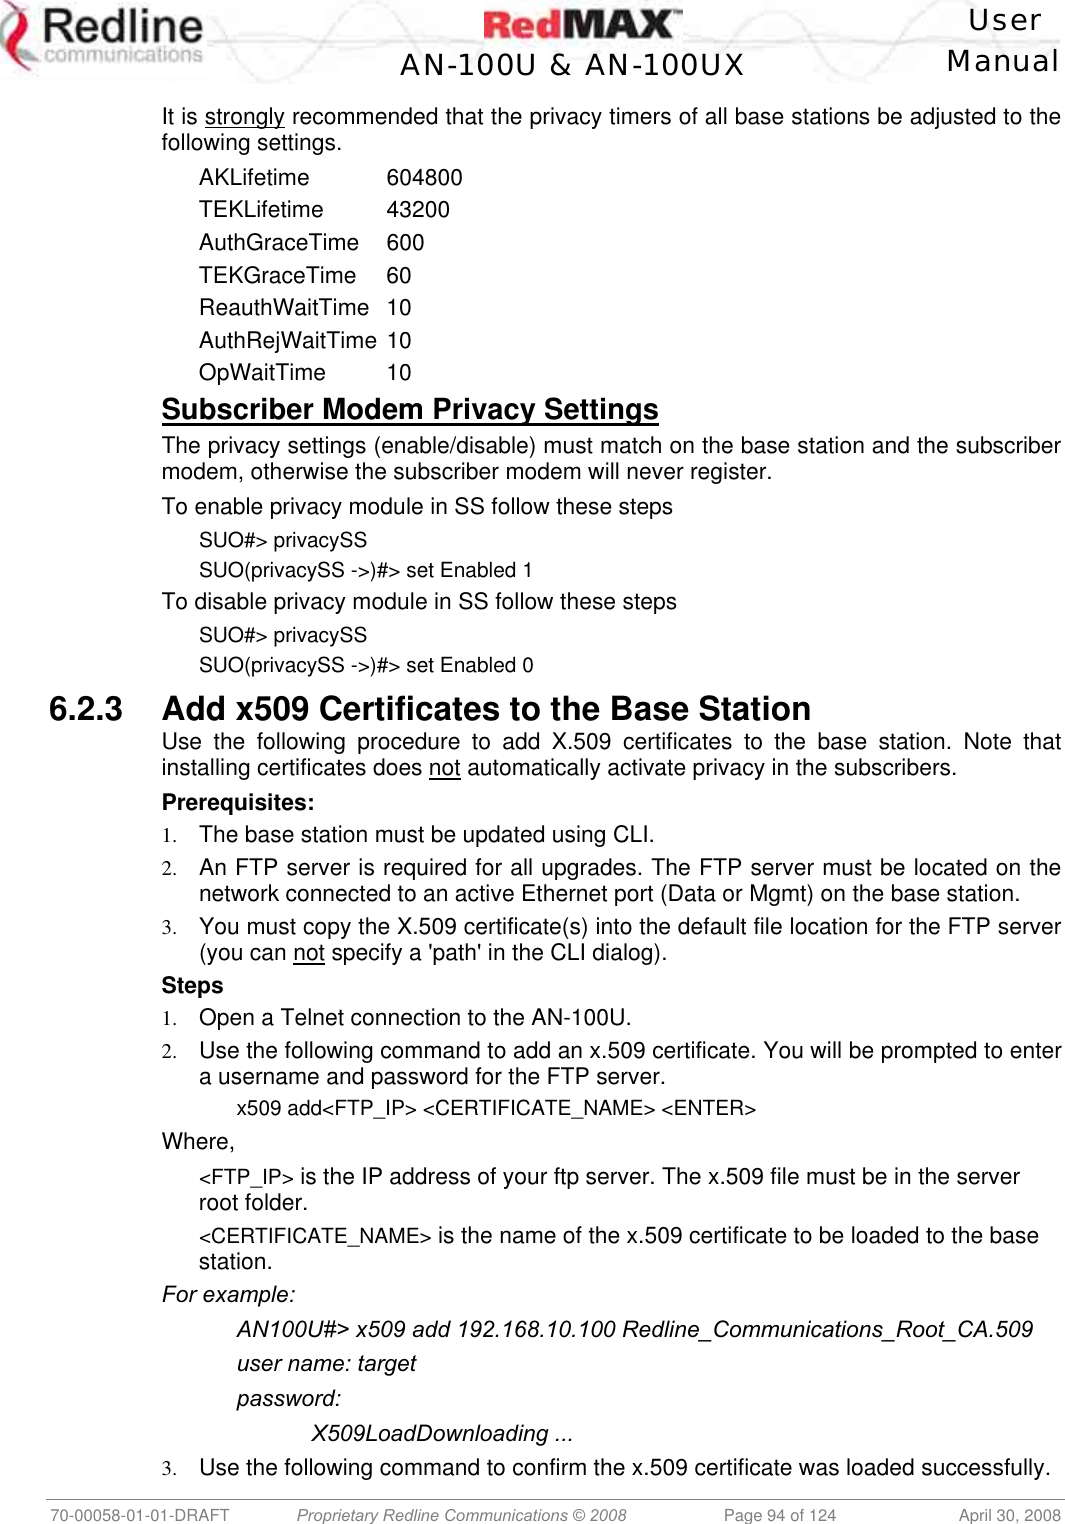    User  AN-100U &amp; AN-100UX Manual   70-00058-01-01-DRAFT  Proprietary Redline Communications © 2008   Page 94 of 124  April 30, 2008 It is strongly recommended that the privacy timers of all base stations be adjusted to the following settings. AKLifetime  604800 TEKLifetime   43200 AuthGraceTime 600 TEKGraceTime 60 ReauthWaitTime 10 AuthRejWaitTime 10 OpWaitTime   10 Subscriber Modem Privacy Settings The privacy settings (enable/disable) must match on the base station and the subscriber modem, otherwise the subscriber modem will never register. To enable privacy module in SS follow these steps SUO#&gt; privacySS SUO(privacySS -&gt;)#&gt; set Enabled 1 To disable privacy module in SS follow these steps SUO#&gt; privacySS SUO(privacySS -&gt;)#&gt; set Enabled 0 6.2.3  Add x509 Certificates to the Base Station Use the following procedure to add X.509 certificates to the base station. Note that installing certificates does not automatically activate privacy in the subscribers. Prerequisites: 1.  The base station must be updated using CLI. 2.  An FTP server is required for all upgrades. The FTP server must be located on the network connected to an active Ethernet port (Data or Mgmt) on the base station. 3.  You must copy the X.509 certificate(s) into the default file location for the FTP server (you can not specify a &apos;path&apos; in the CLI dialog). Steps 1.  Open a Telnet connection to the AN-100U. 2.  Use the following command to add an x.509 certificate. You will be prompted to enter a username and password for the FTP server.   x509 add&lt;FTP_IP&gt; &lt;CERTIFICATE_NAME&gt; &lt;ENTER&gt; Where, &lt;FTP_IP&gt; is the IP address of your ftp server. The x.509 file must be in the server root folder. &lt;CERTIFICATE_NAME&gt; is the name of the x.509 certificate to be loaded to the base station. For example:   AN100U#&gt; x509 add 192.168.10.100 Redline_Communications_Root_CA.509   user name: target  password:   X509LoadDownloading ... 3.  Use the following command to confirm the x.509 certificate was loaded successfully.  